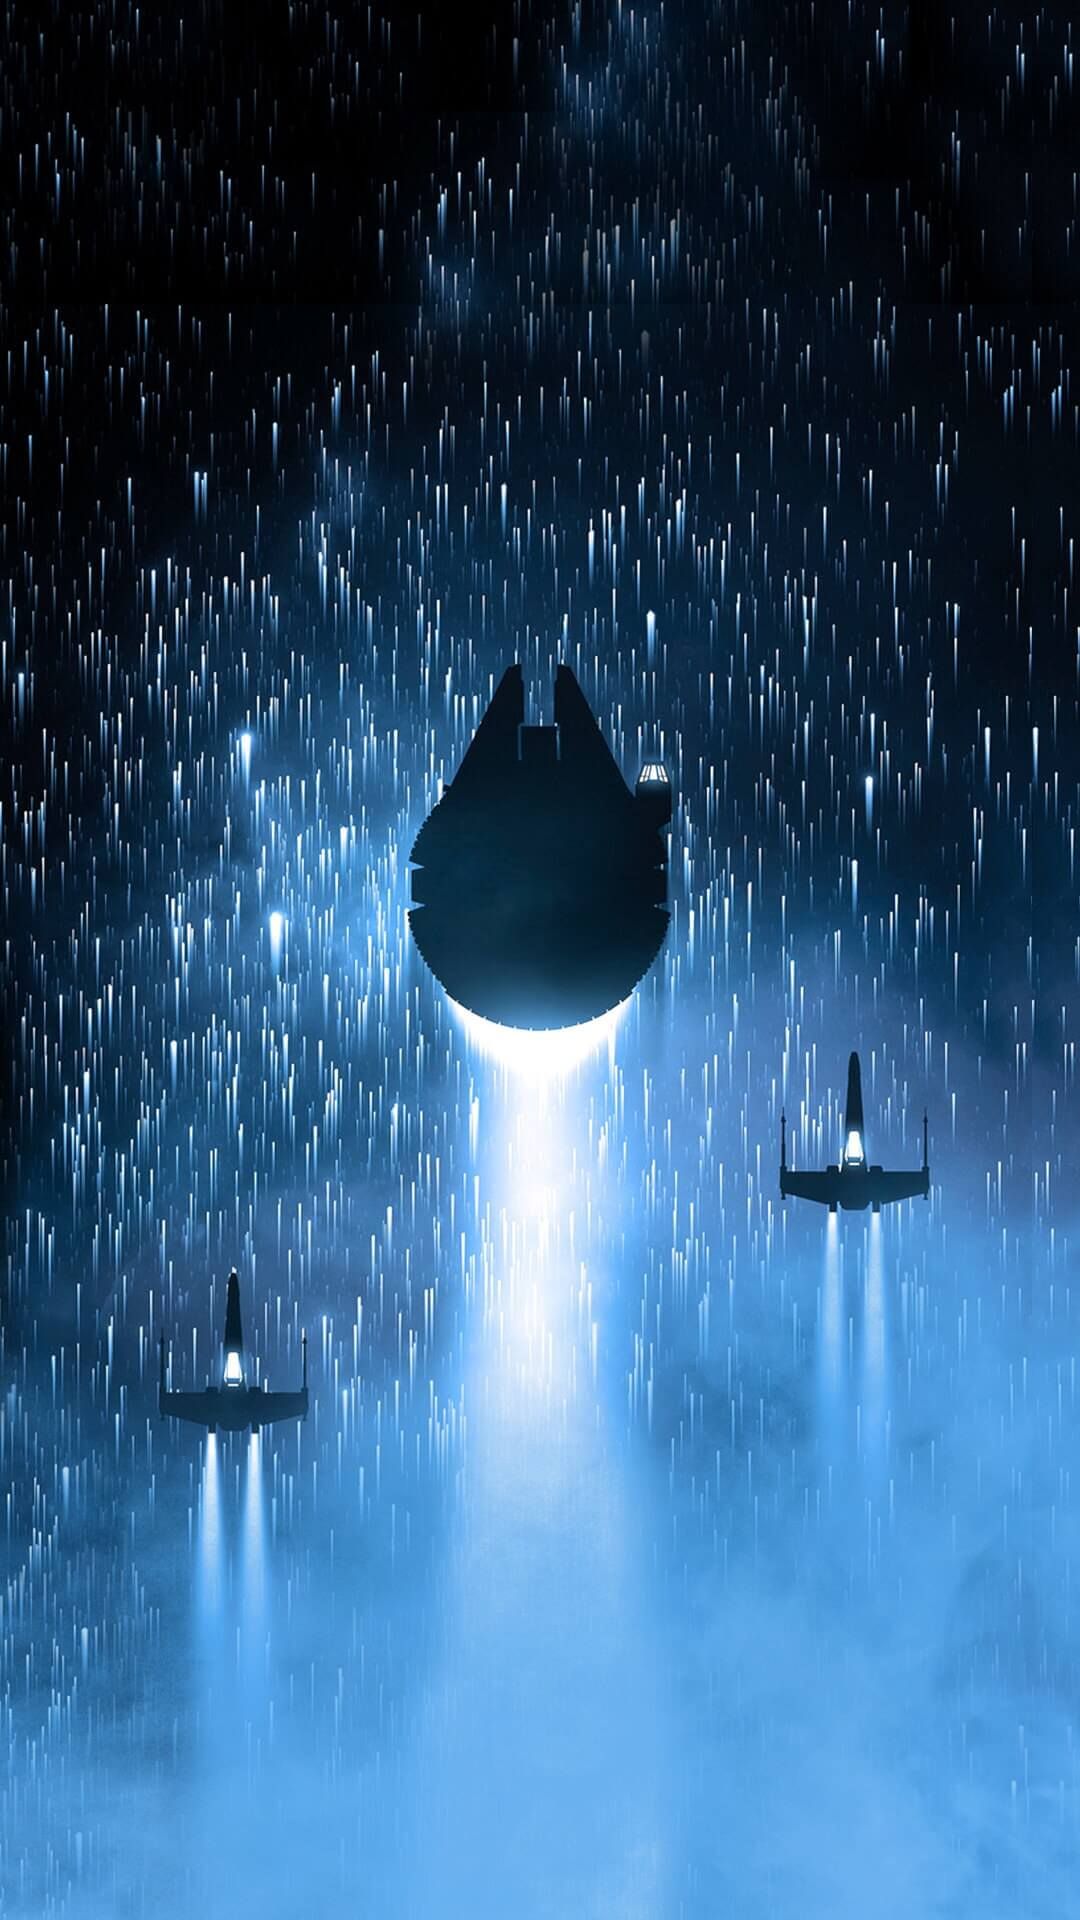 Mobile Wallpaper Inspiration For Those In Need Of a Change. Star wars wallpaper, Star wars background, Star wars image